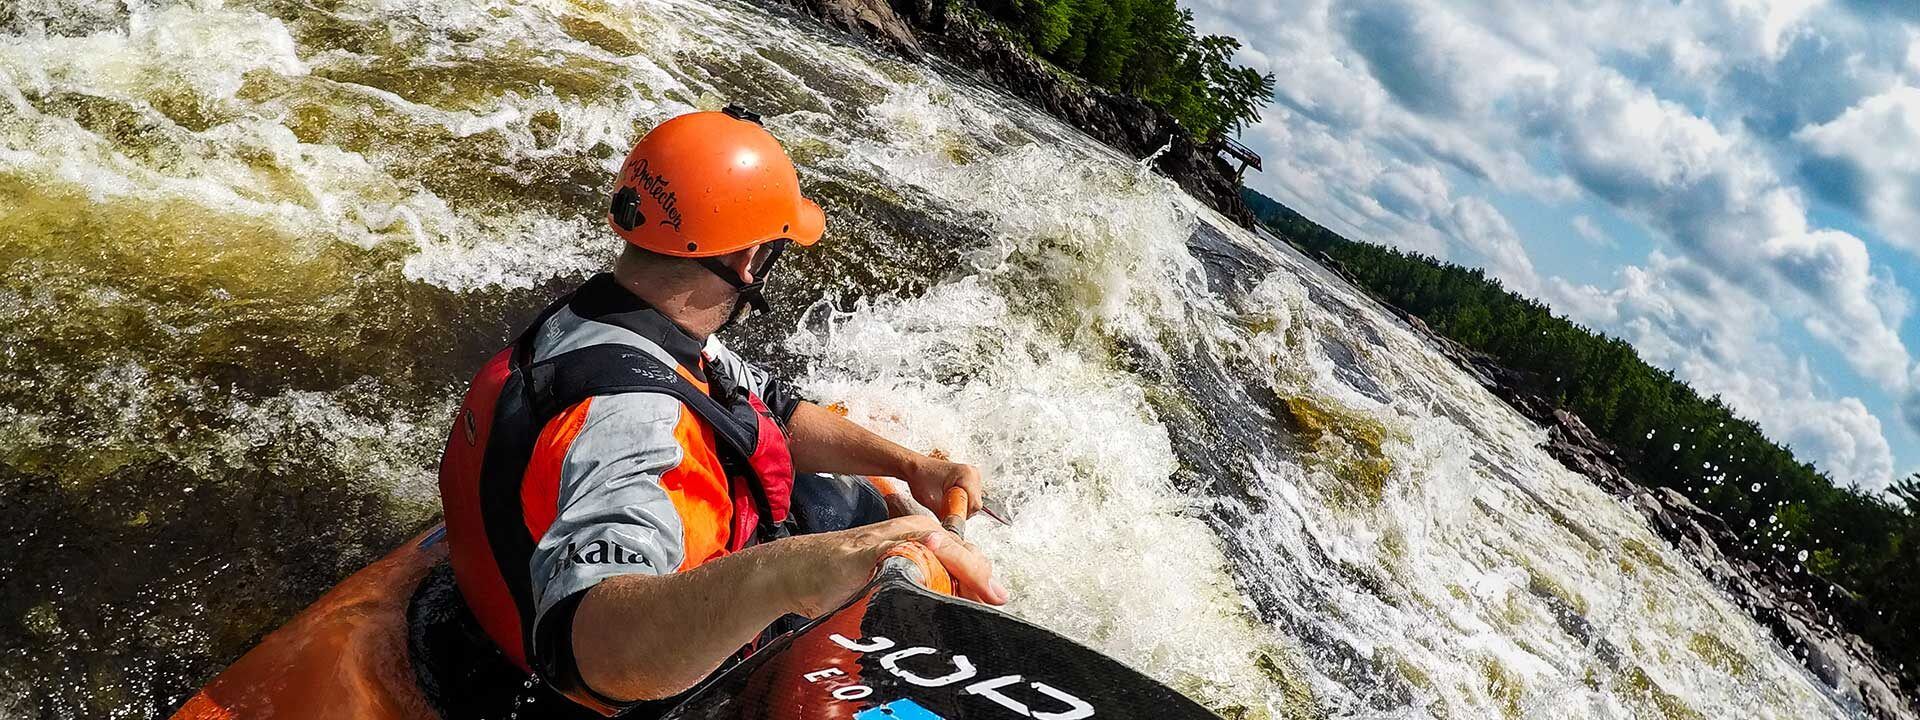 Learn to Whitewater Kayak